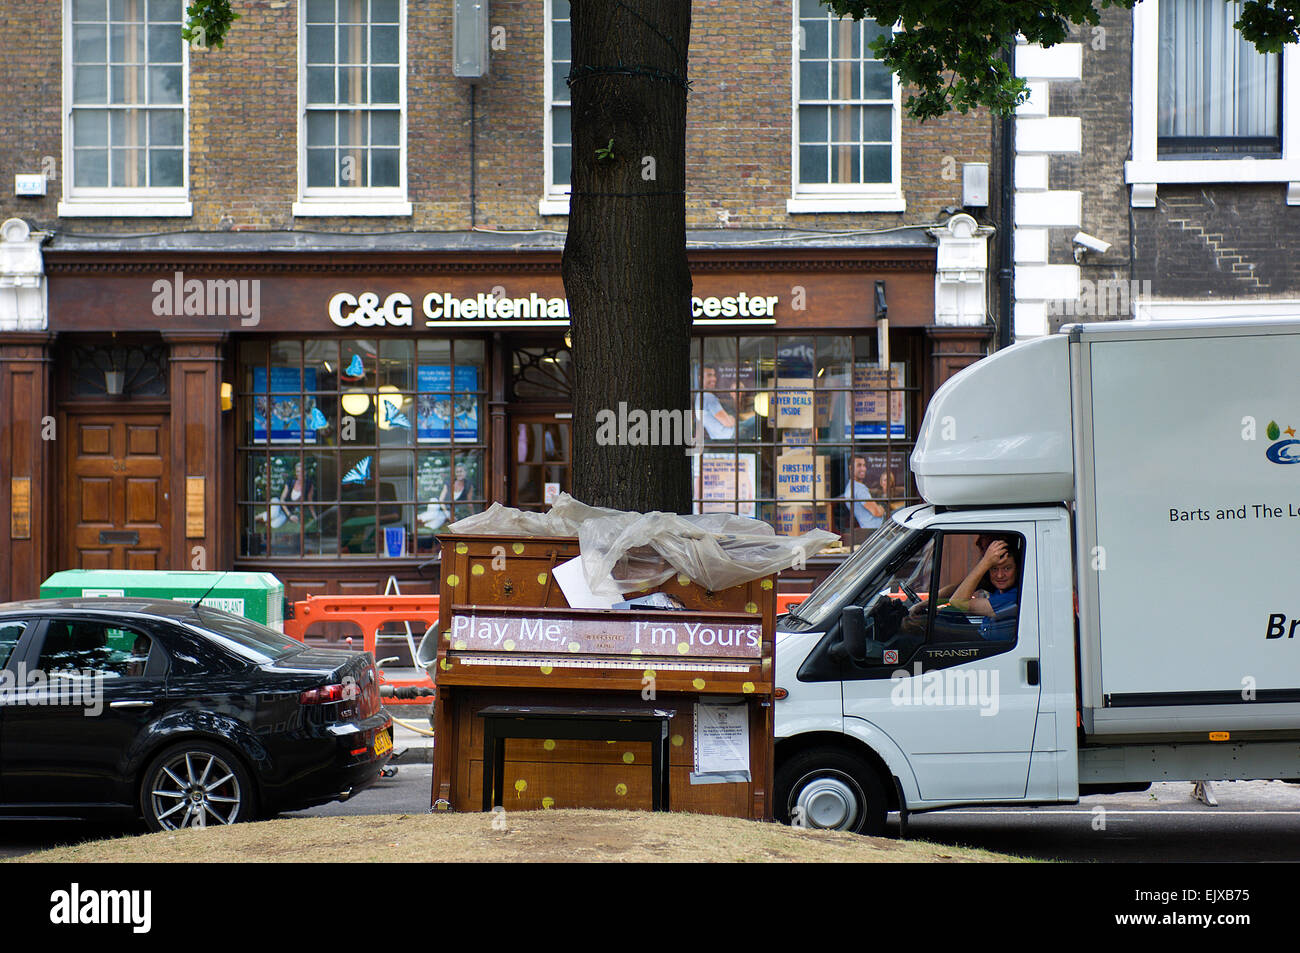 City workers have got used now to seeing pianos in the street carrying notices saying “Play Me, I’m Yours”. Stock Photo